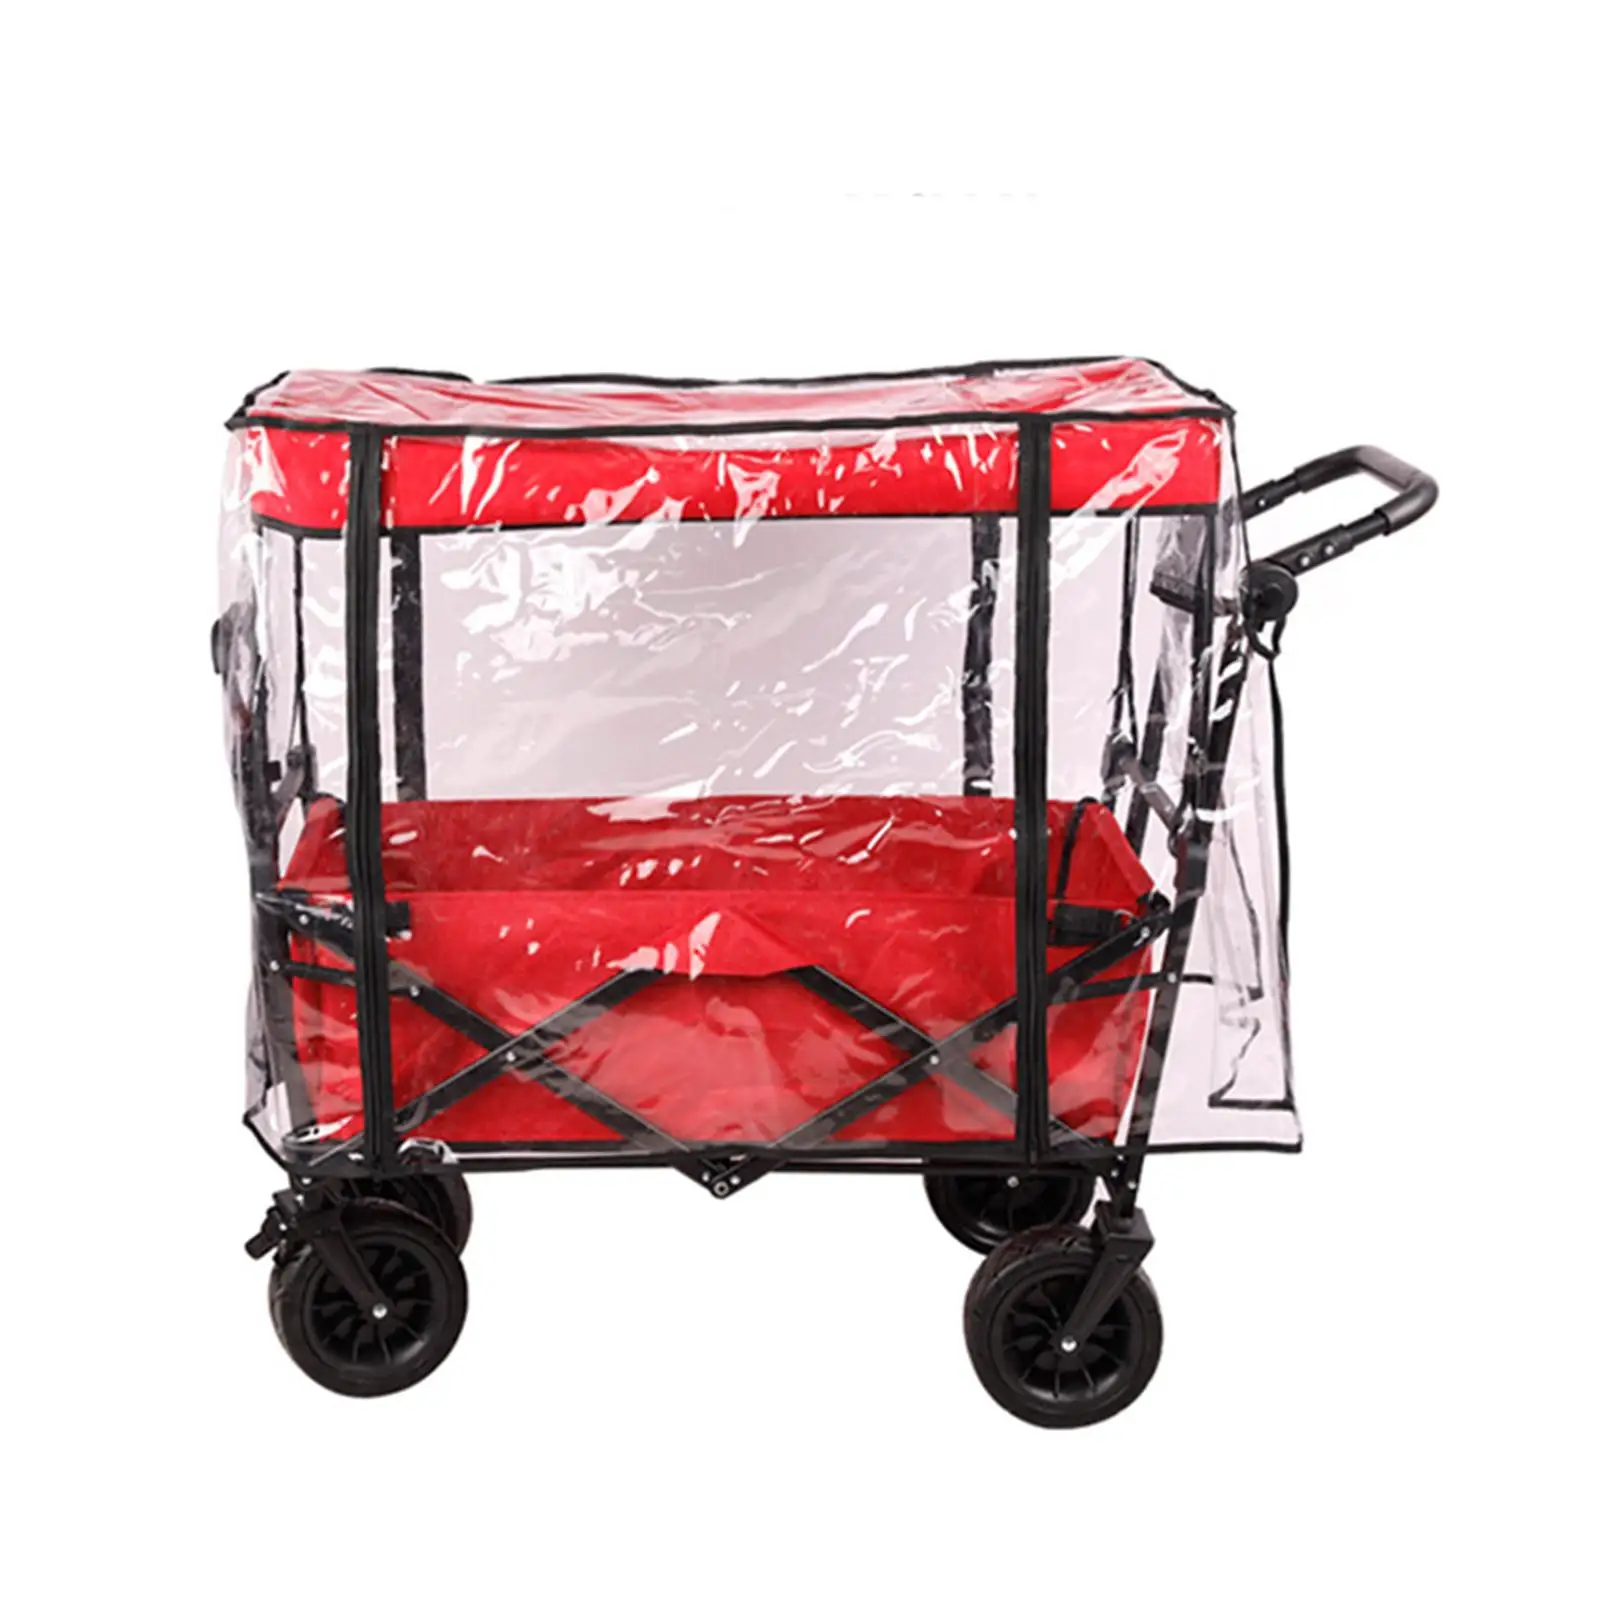 Collapsible Wagon Cart Waterproof Cover Canopy PVC Material Durable 85x40x70cm Dustproof for Folding Wagons with Metal Frame